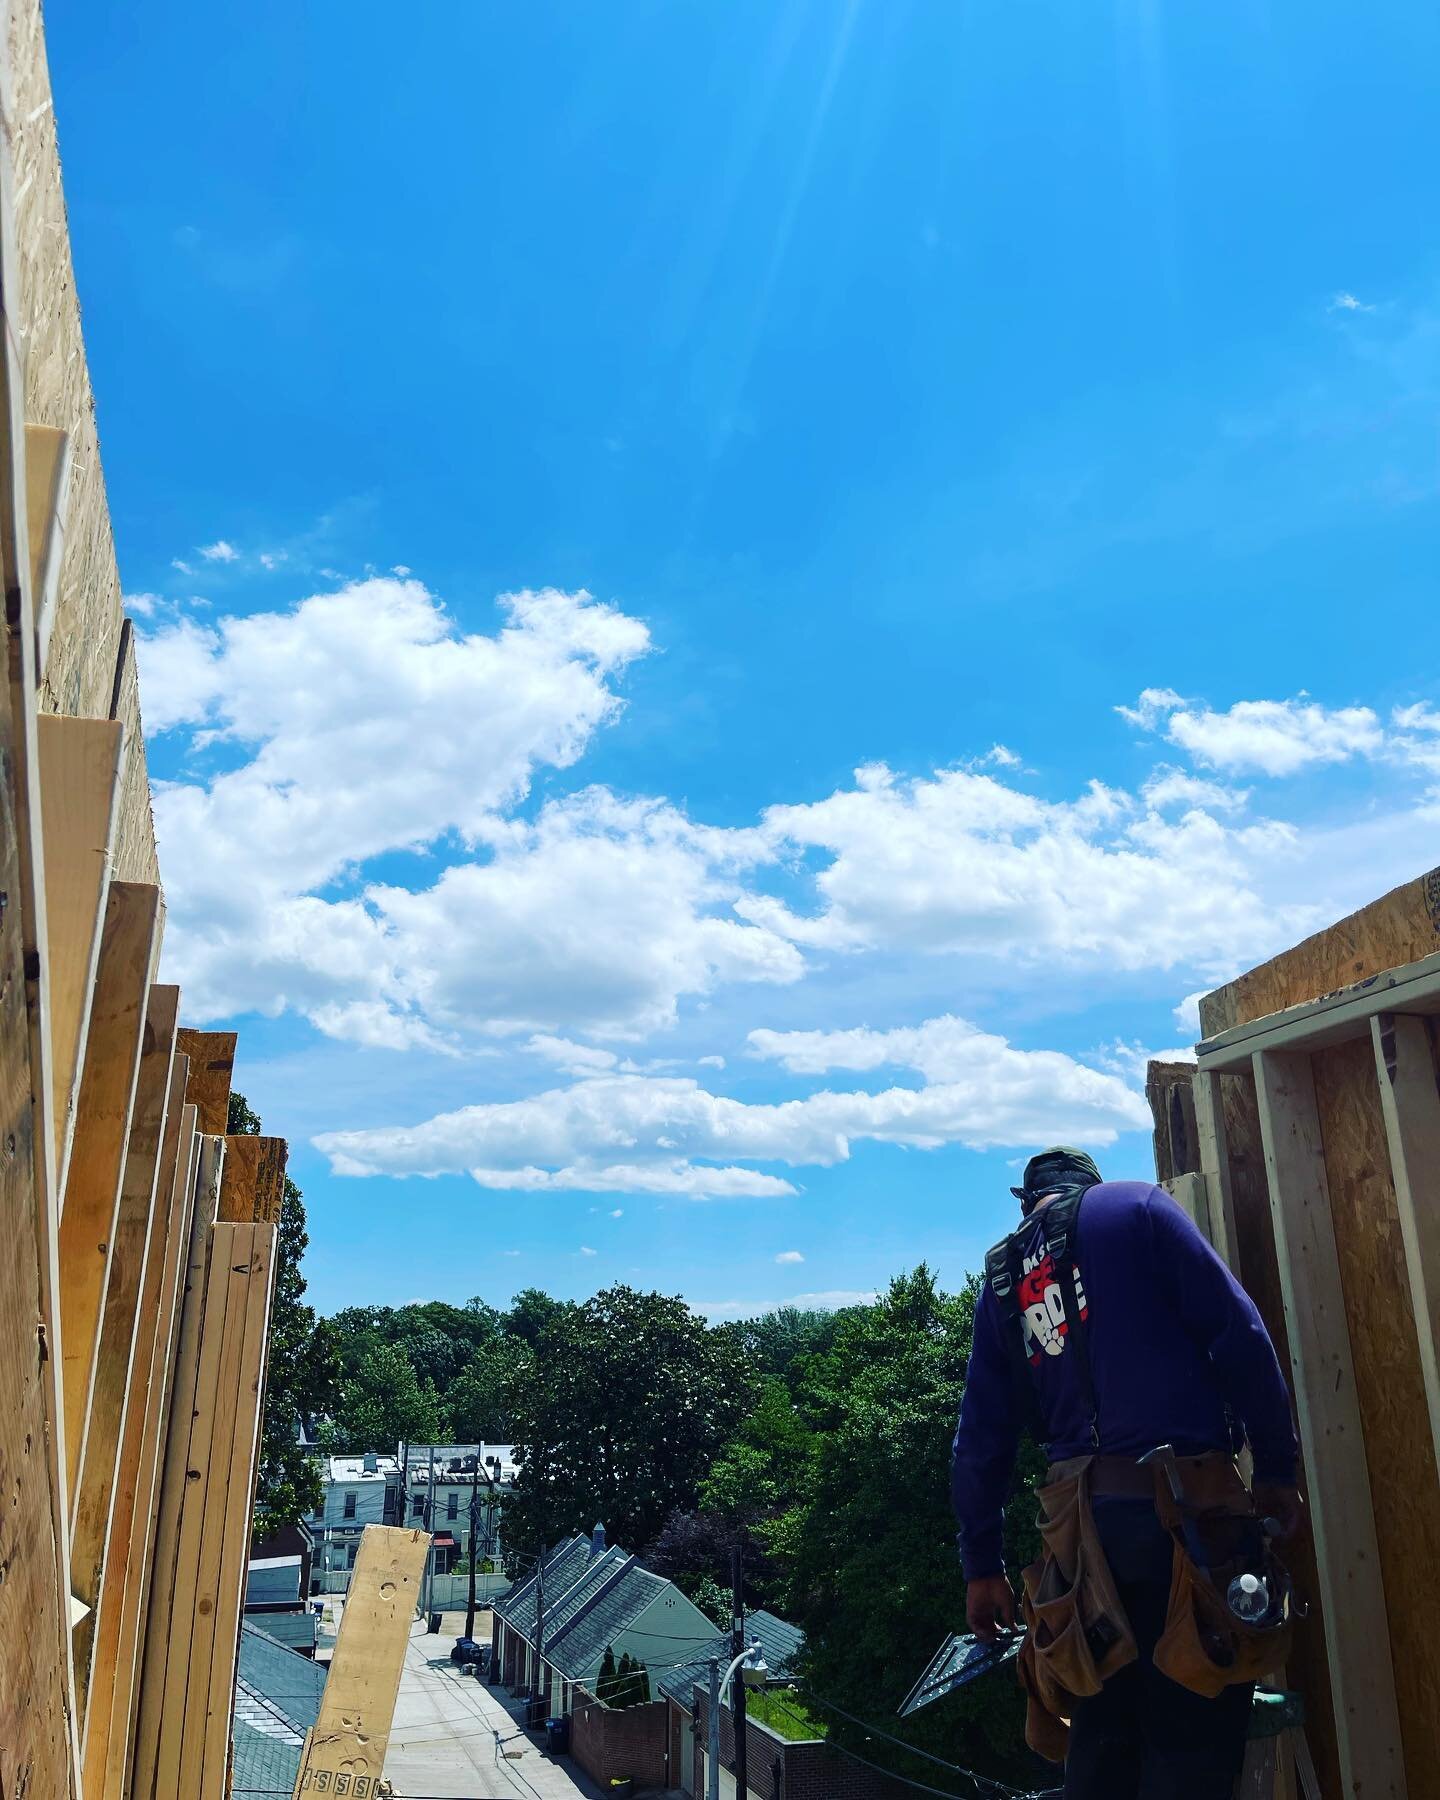 Letting the light in. 🌞 Dormer in the works on this special Georgetown project.  Getting it just right in a future sunny 3rd floor reading nook&hellip; features big sky views and direct sight lines to the Washington Monument.  Building a spot fit fo